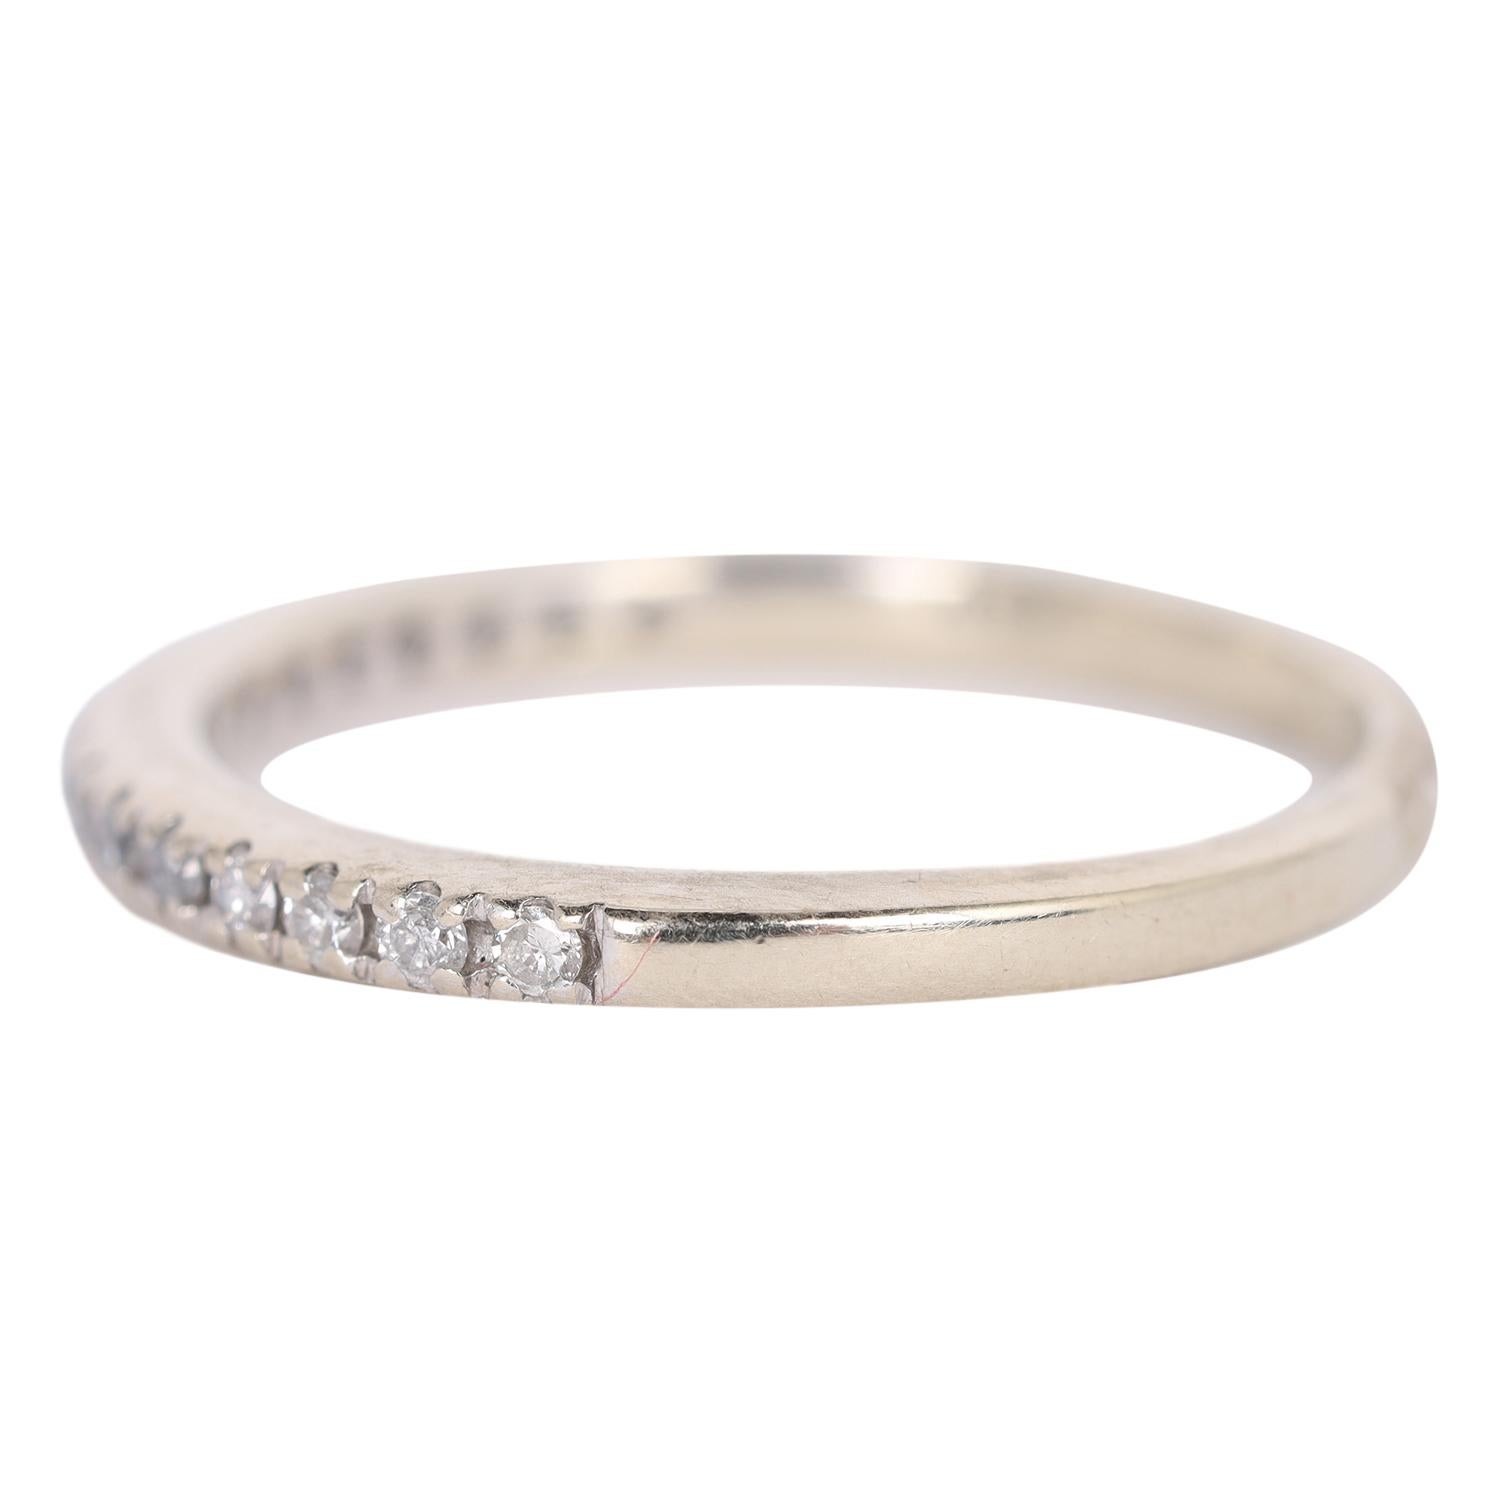 Women's White Gold Diamond Band Ring 5.25 For Sale